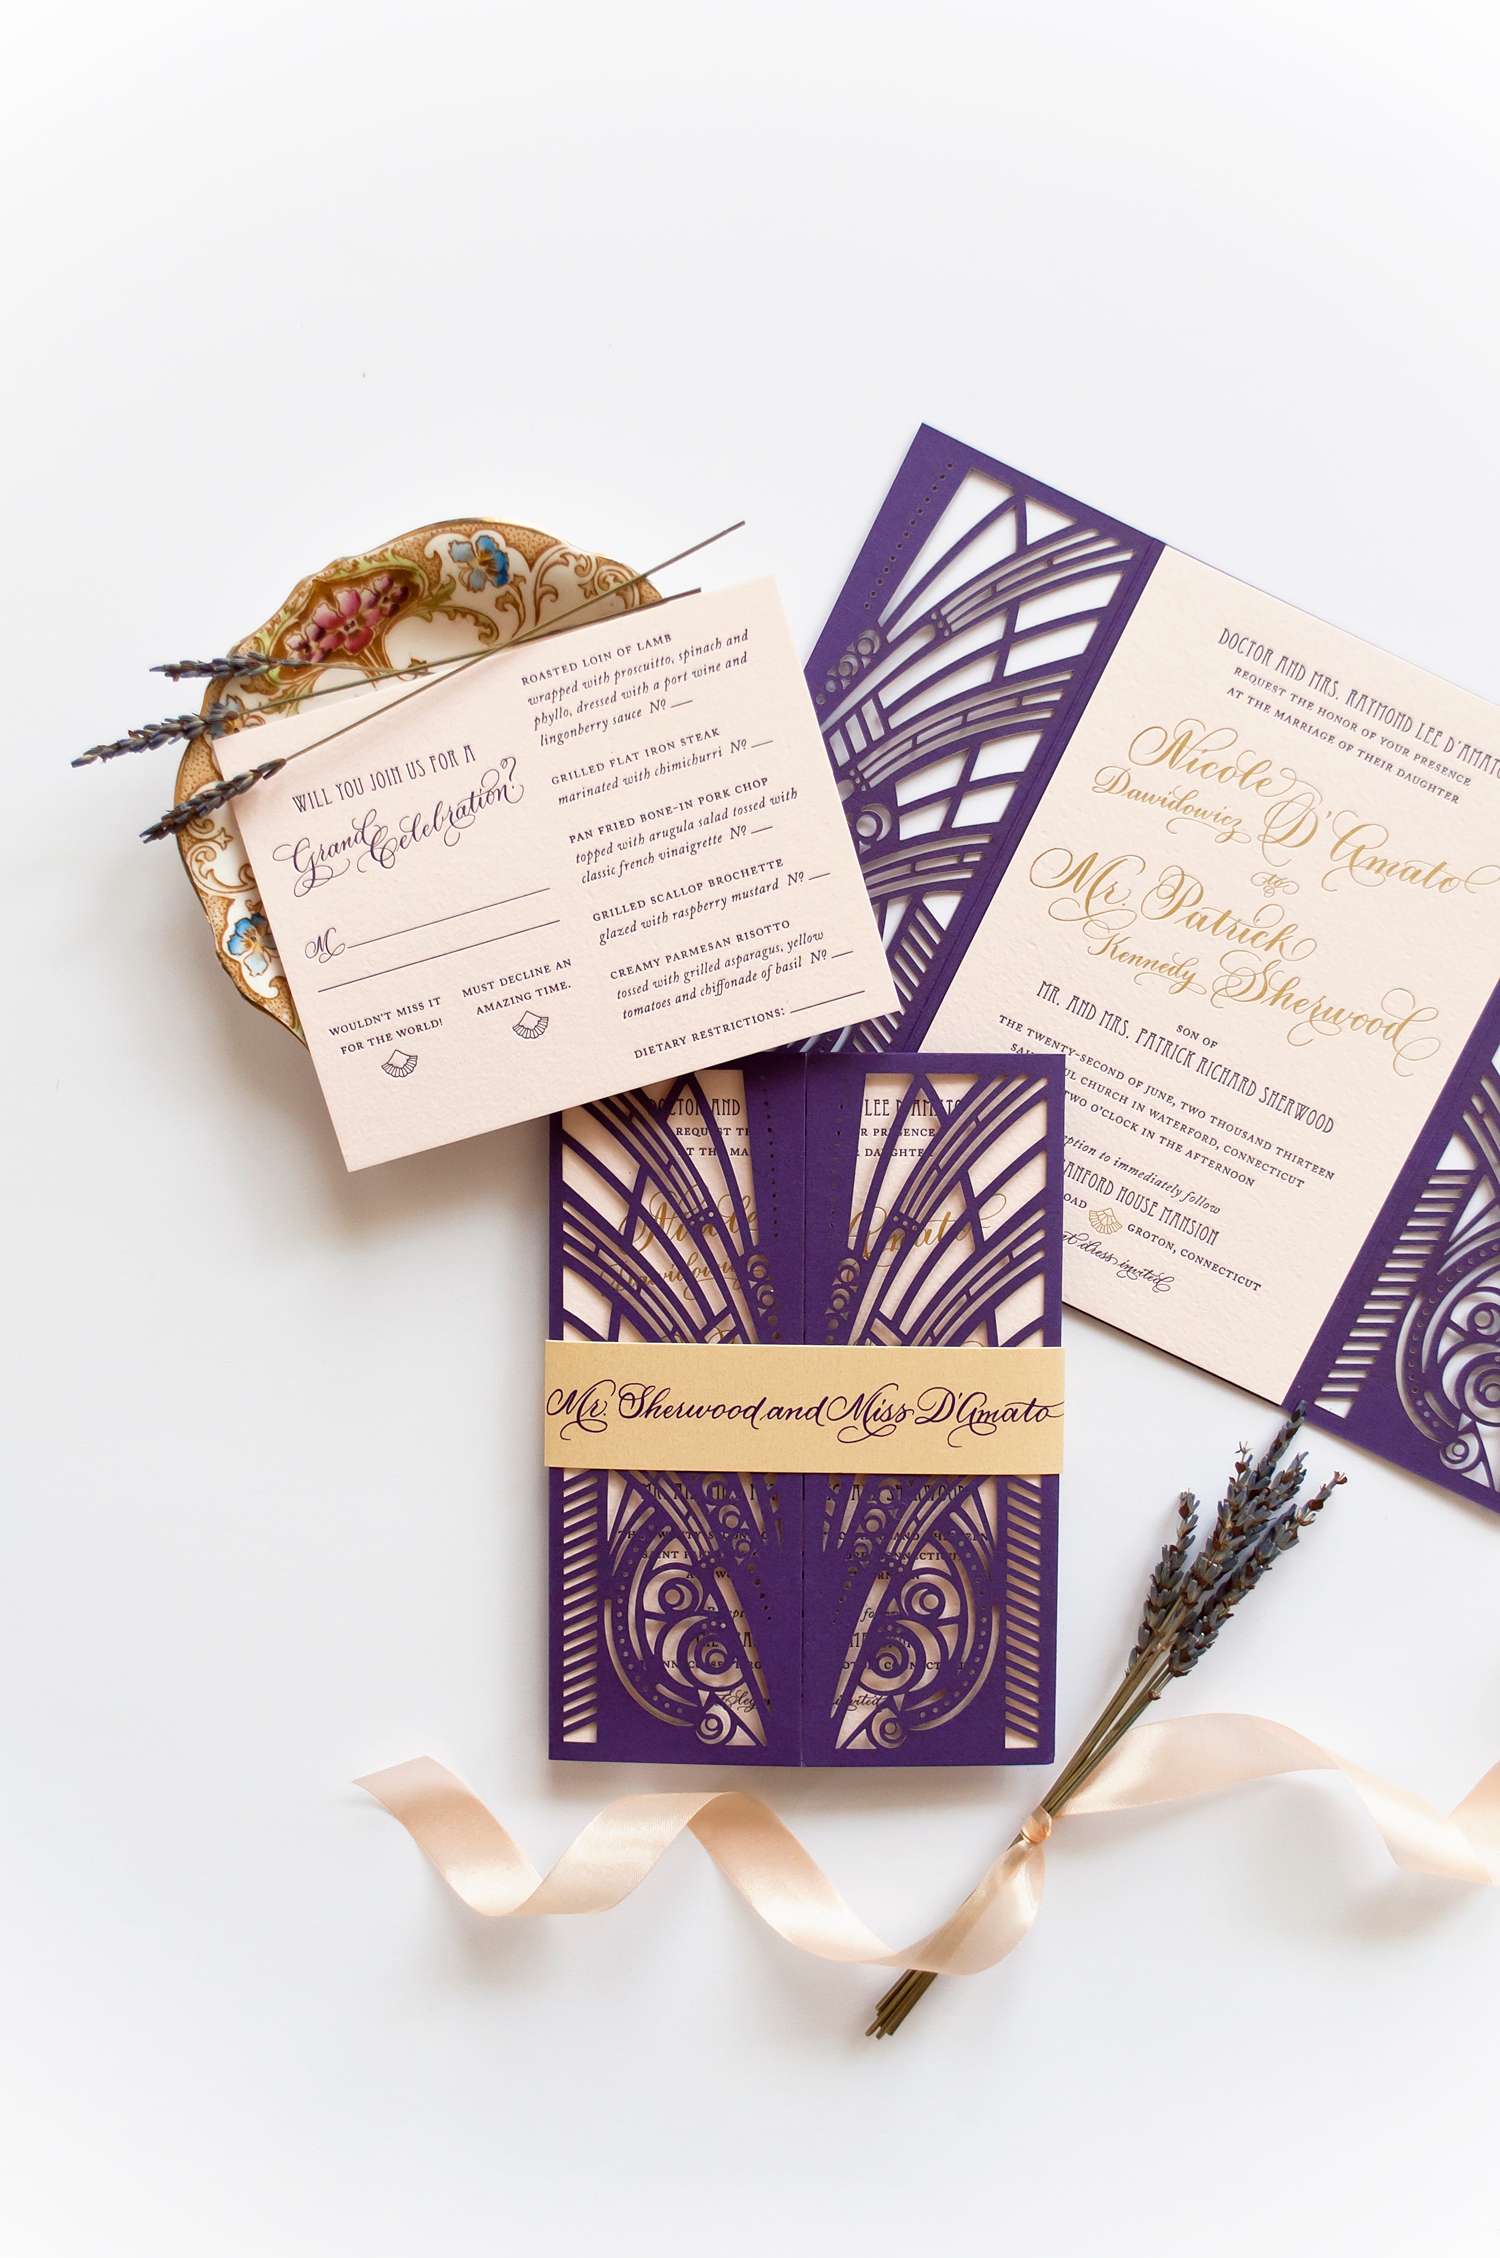 Gatsby themed wedding invites in blush pink, purple, and gold with letter press and laser cut details.